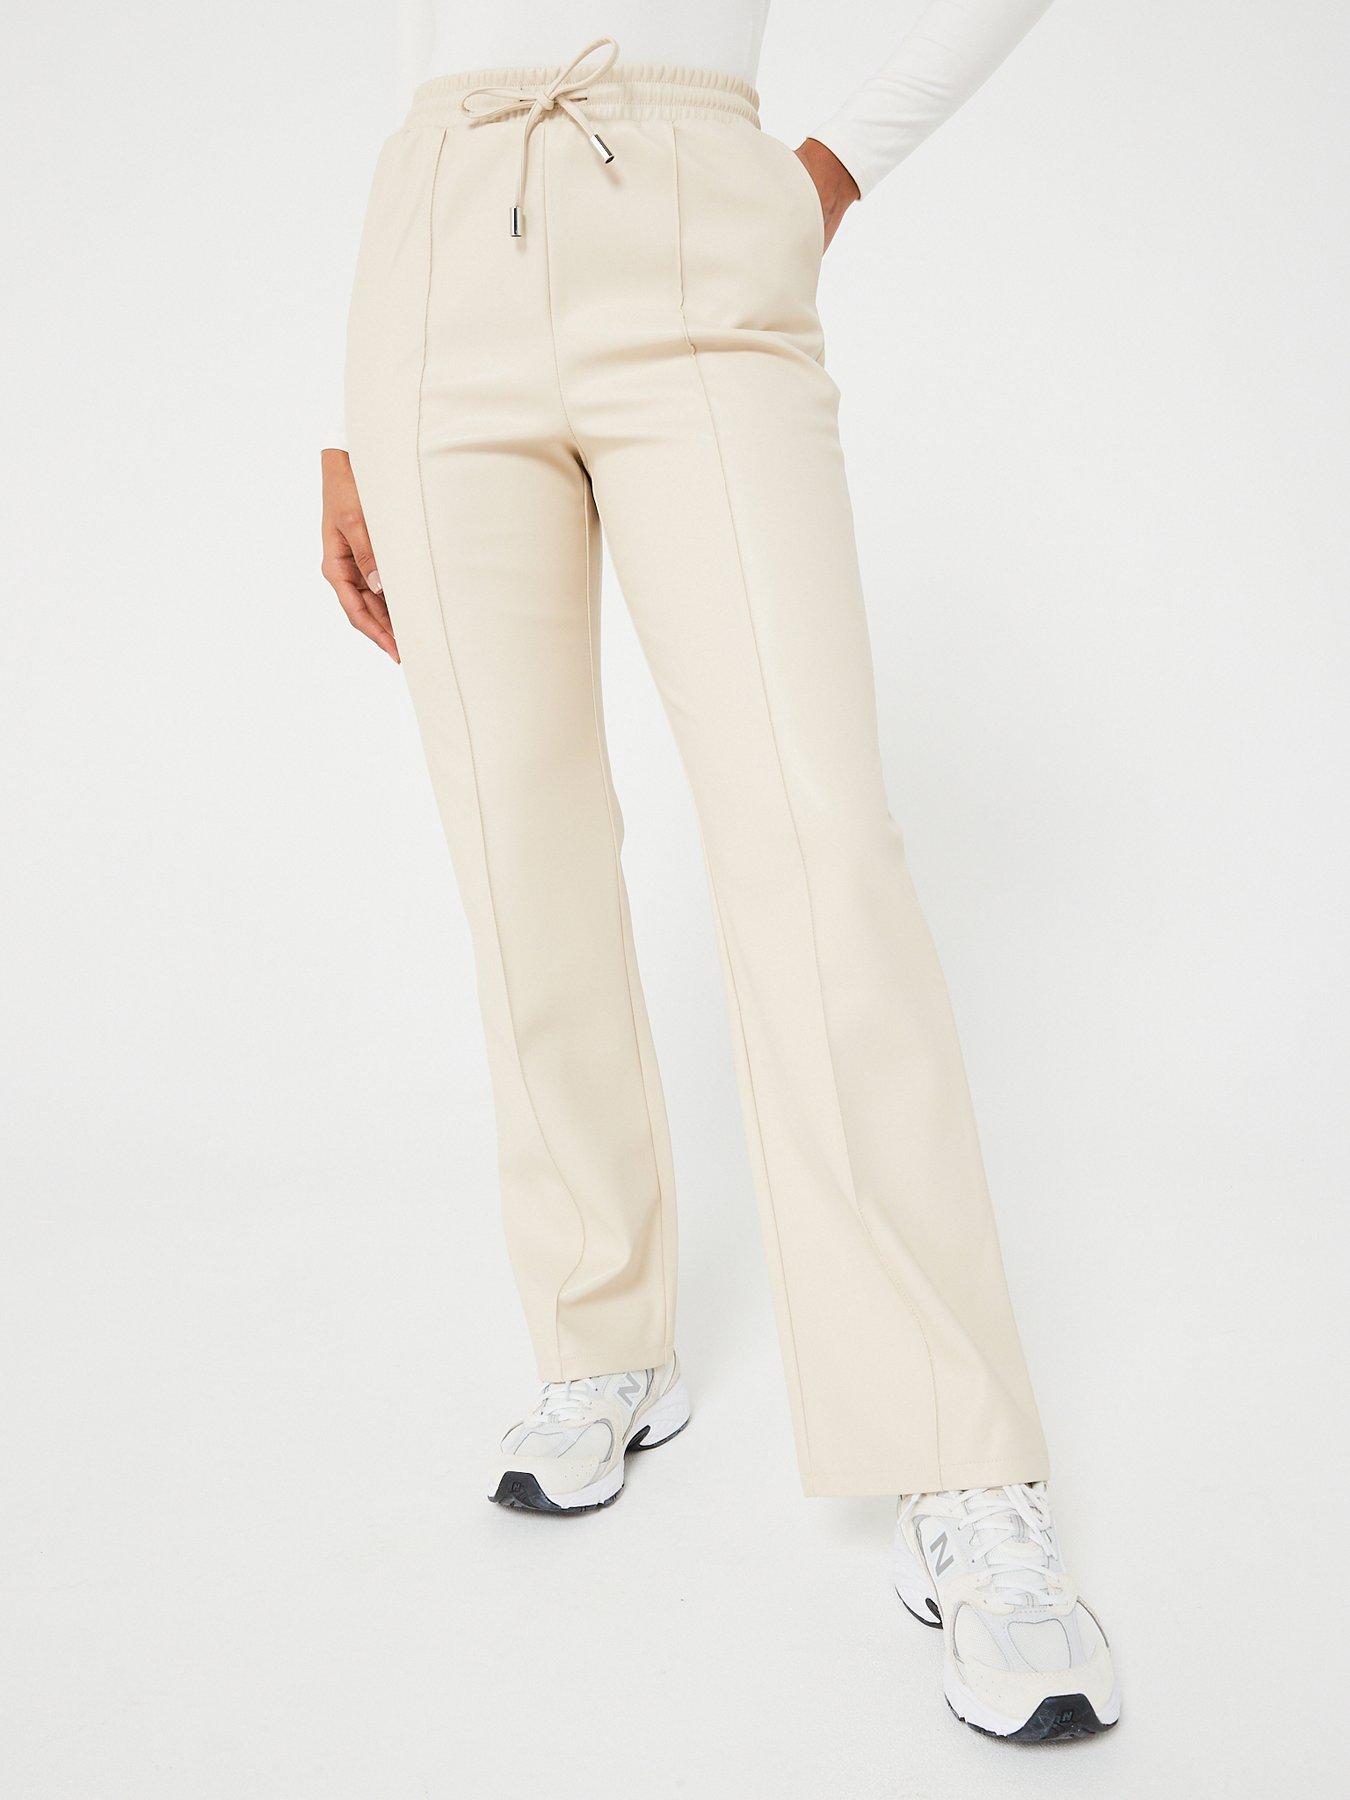 Buy Piroh Womens Cotton Solid Straight Trouser Pant White online